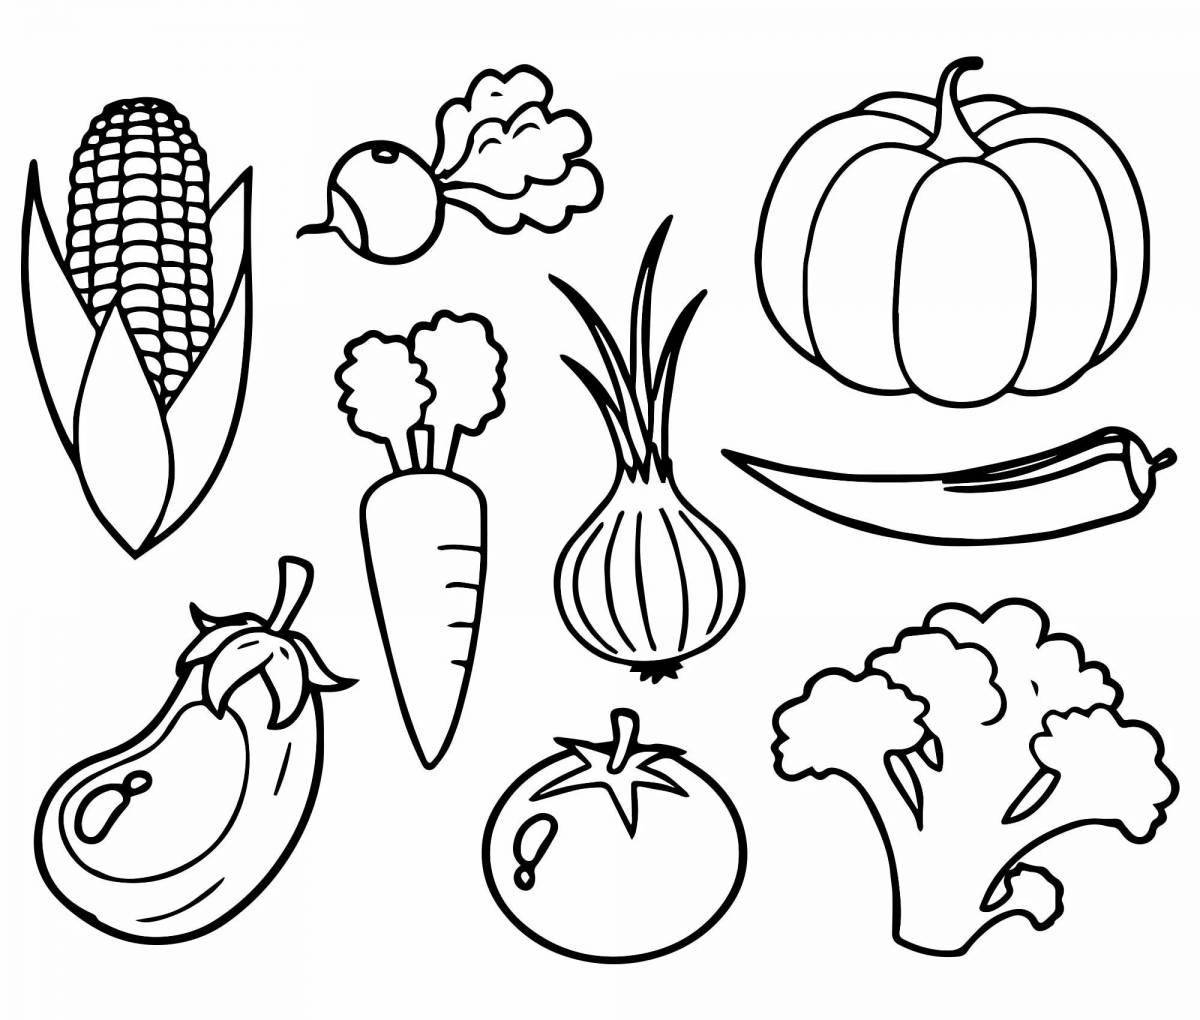 Attractive fruits and vegetables coloring pages